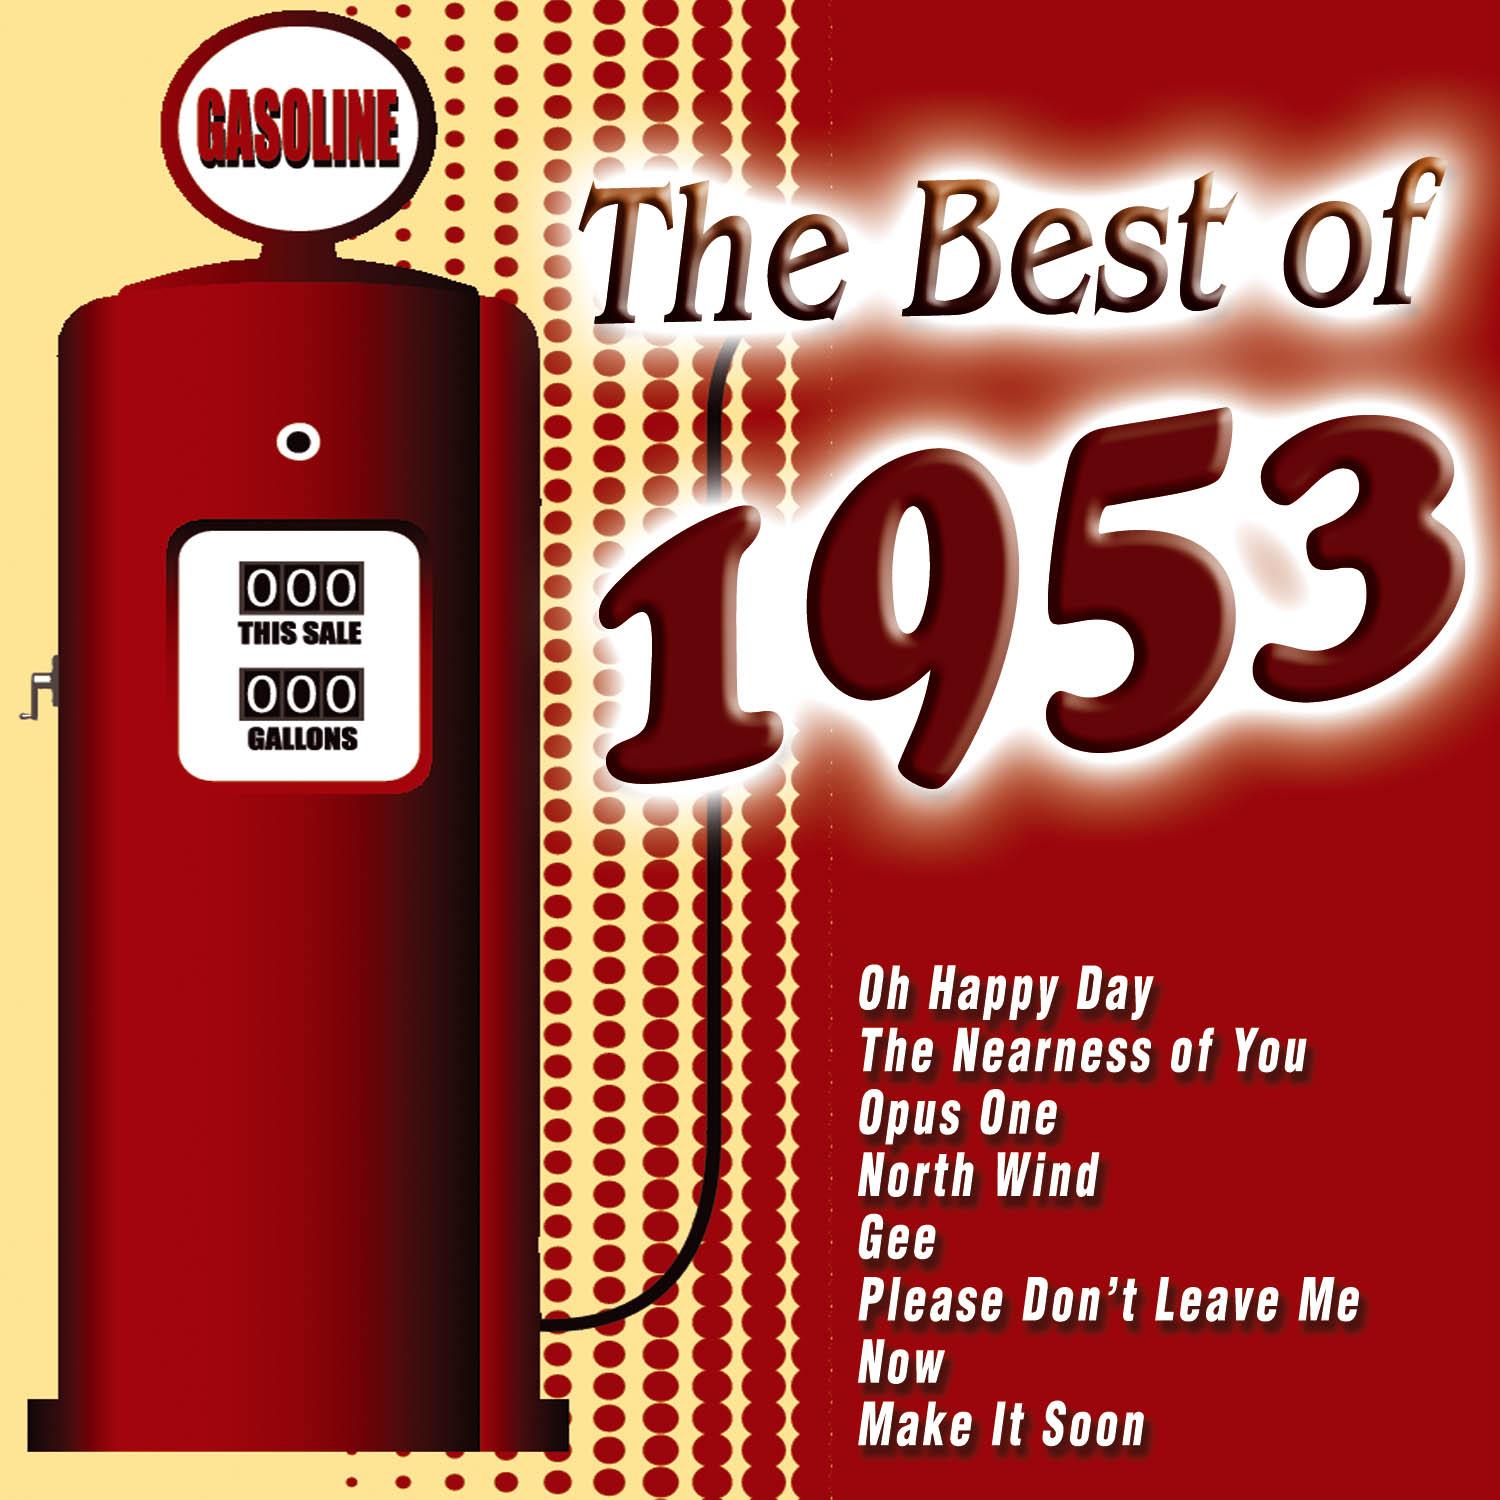 The Best of 1953